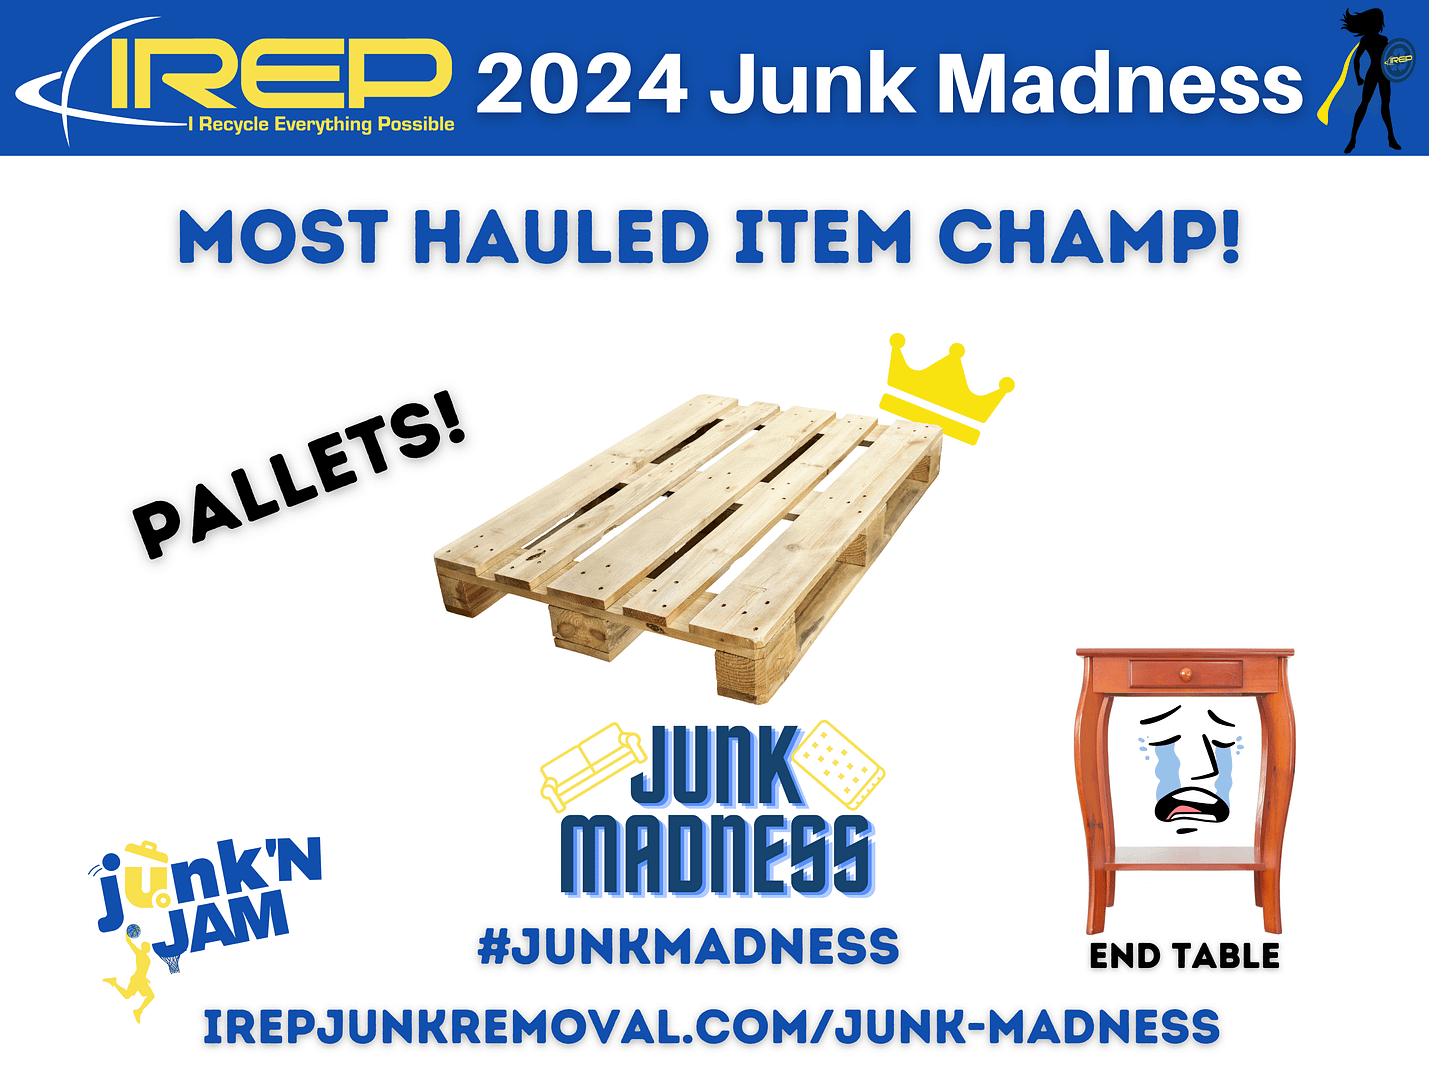 Junk Madness 2024 for junk removal fun along with March Madness basketball brackets